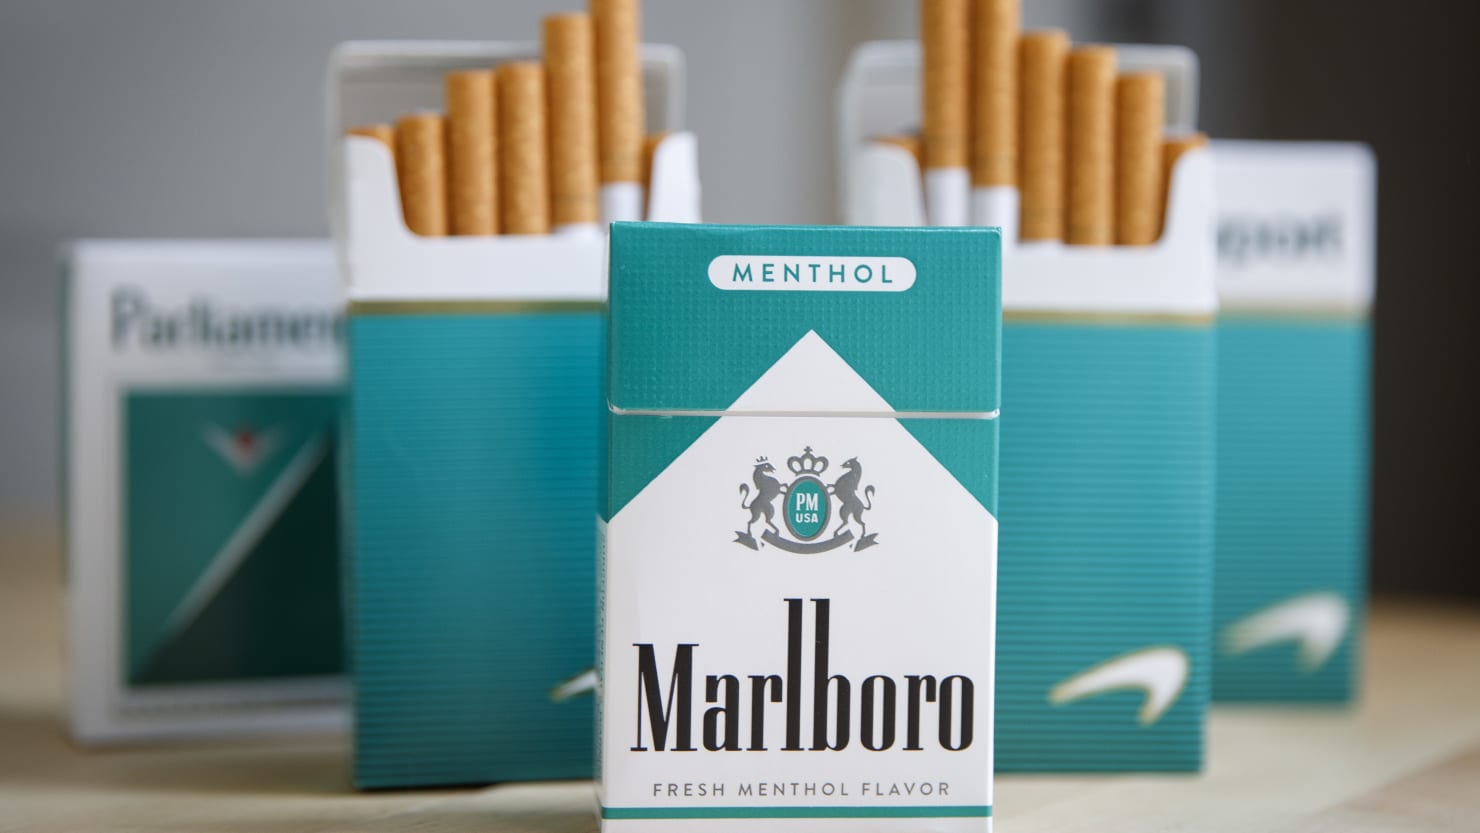 Biden administration could drastically cut nicotine in cigarettes, reports WSJ